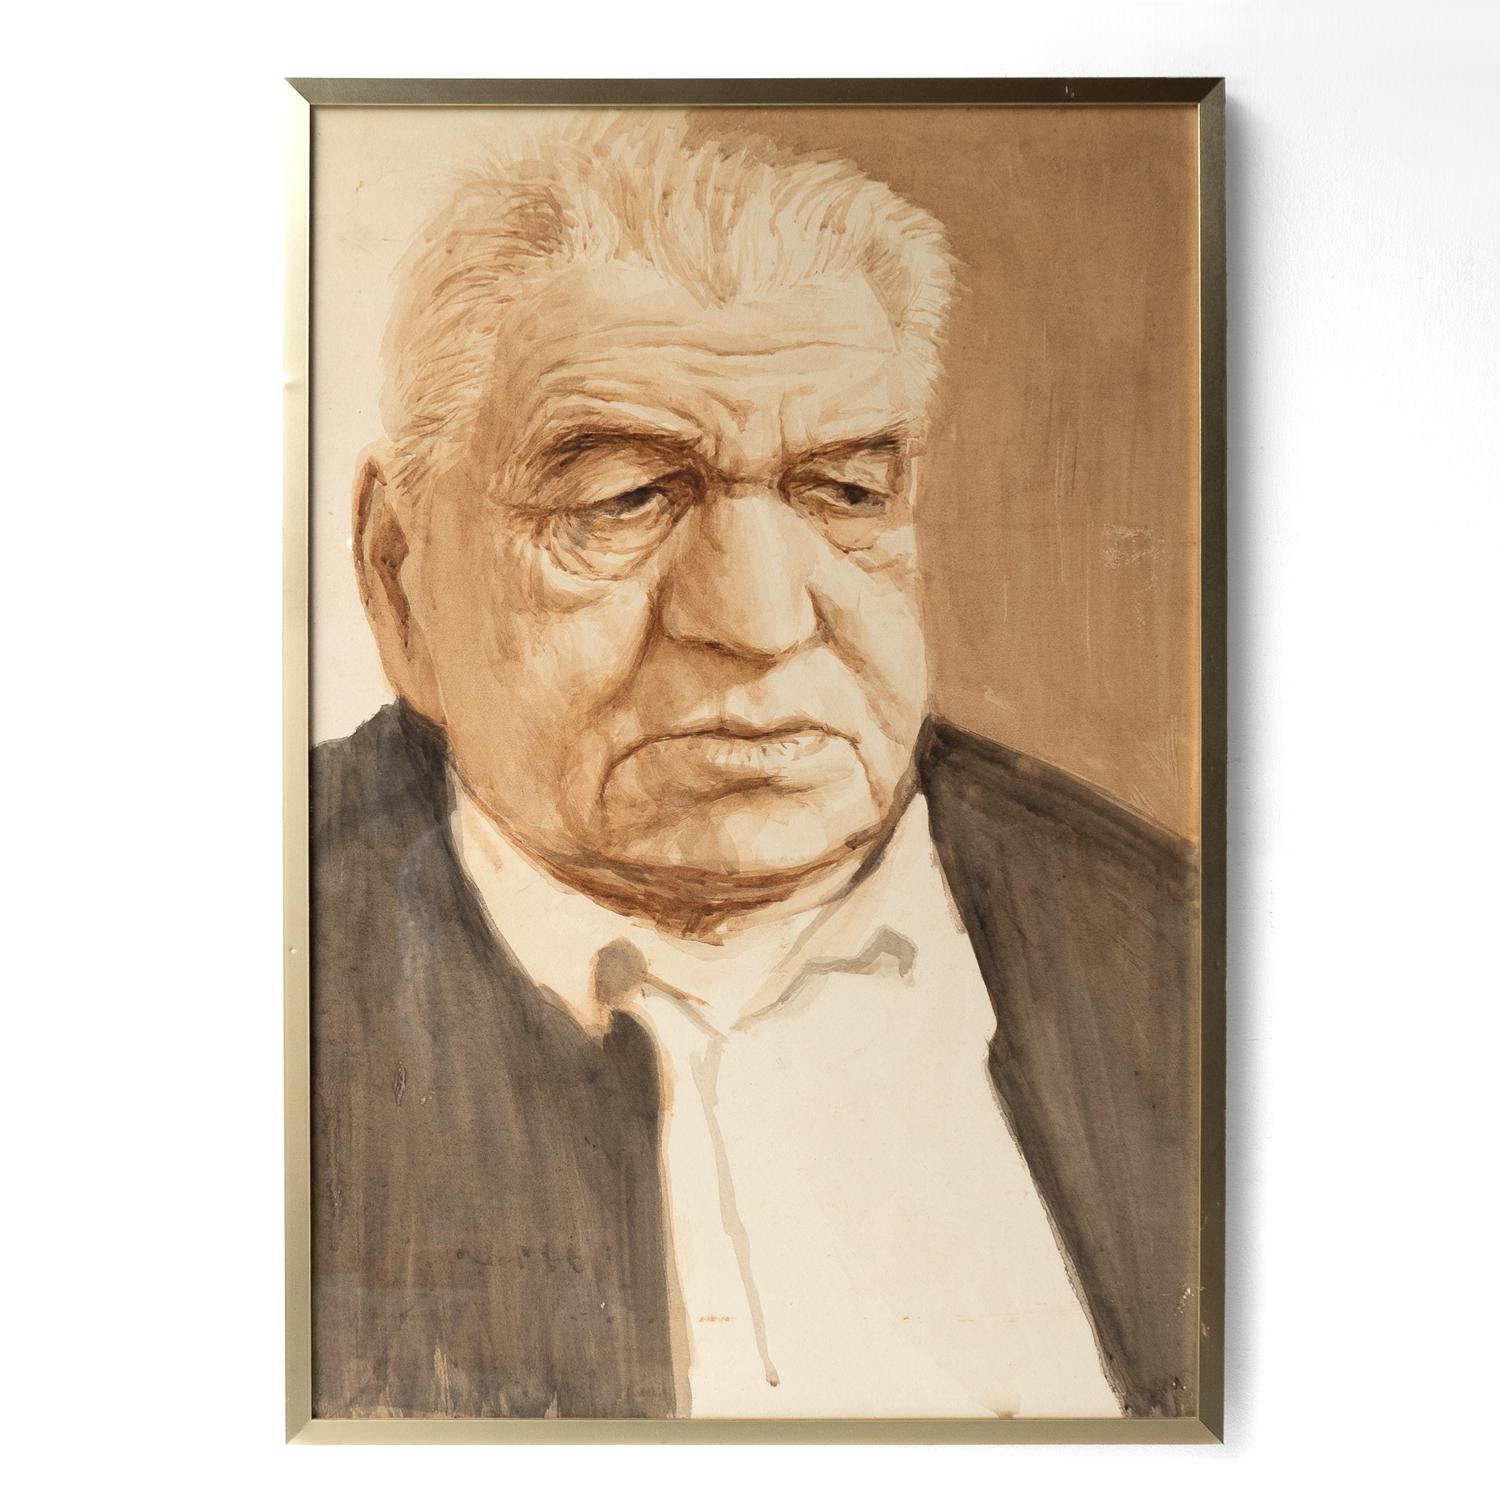 ORIGINAL MID-CENTURY PORTRAIT PAINTING BY SAM WALSH (1934-1989)
By repute depicting the artist’s father. A typically zoomed-in perspective and large-scale portrait skilfully capturing the sitter’s character and expression depicting a life that has